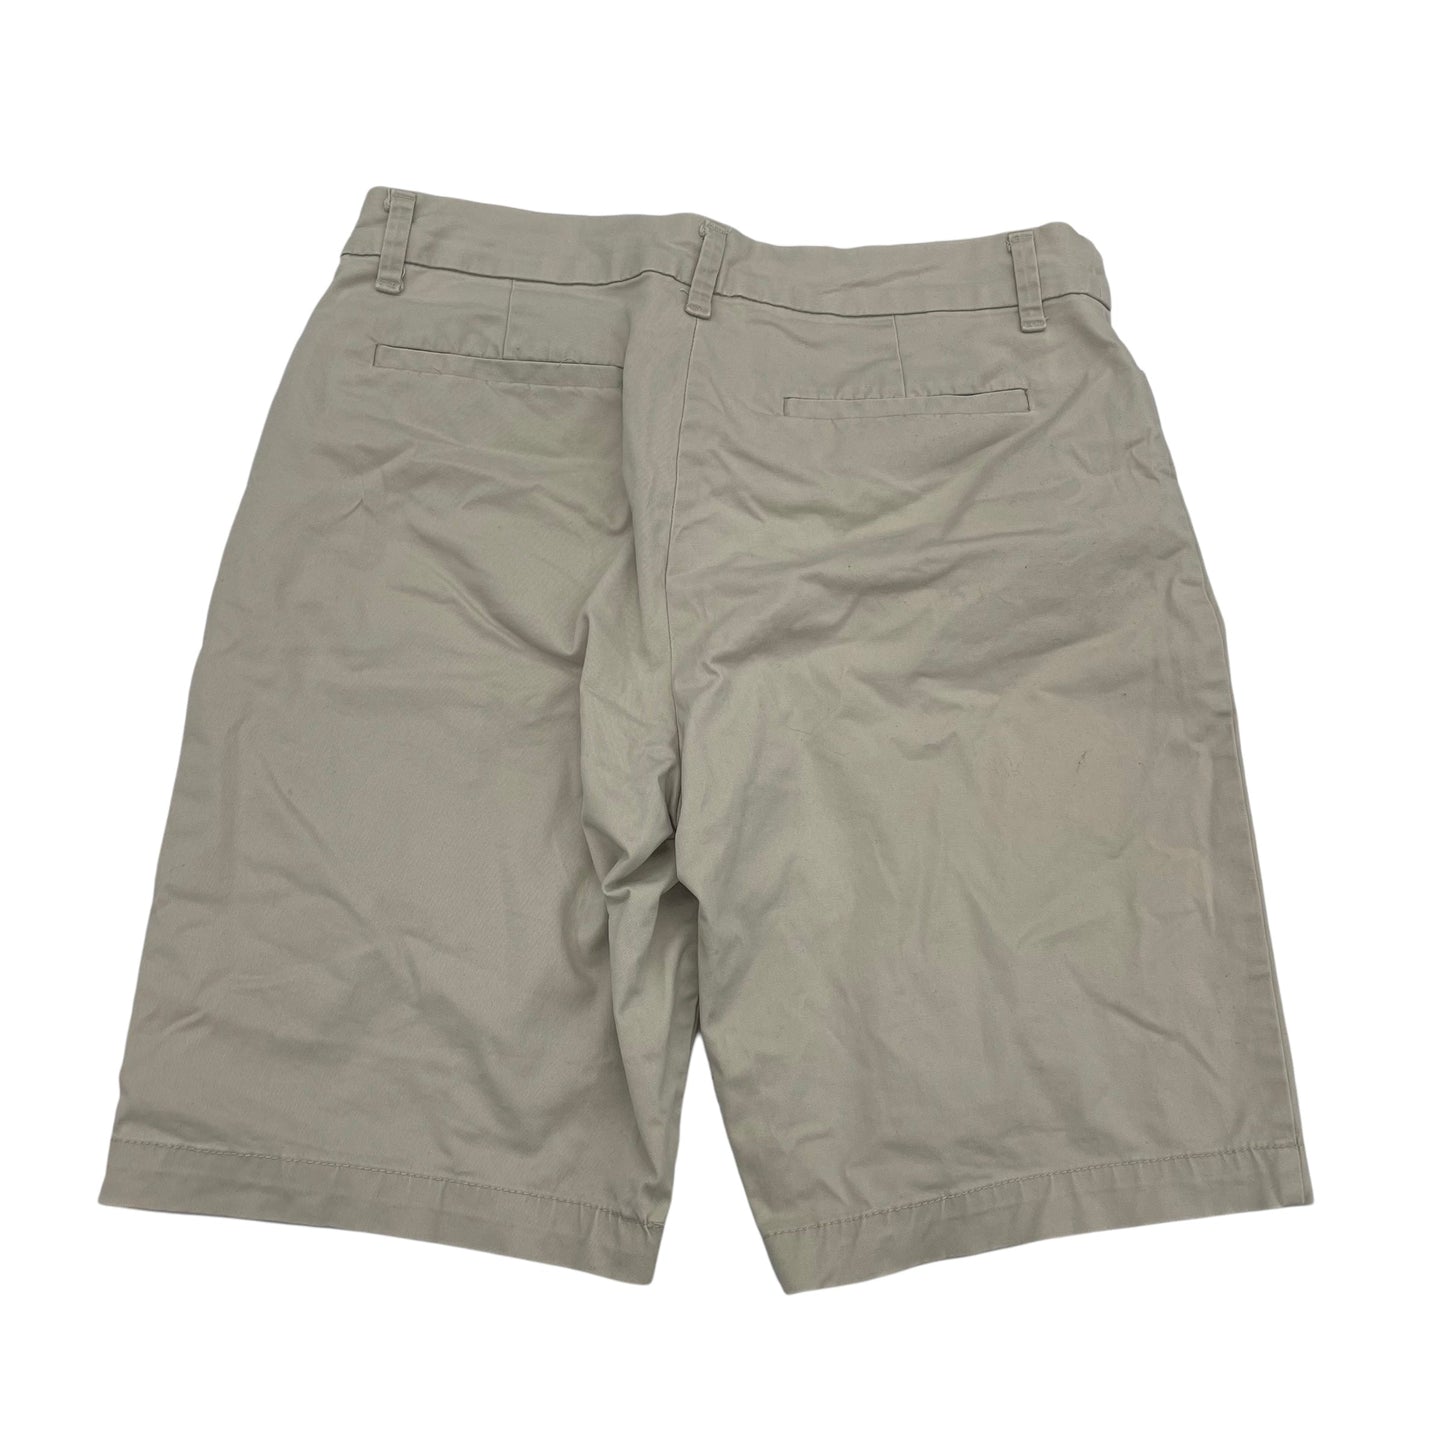 Shorts By Croft And Barrow  Size: 8